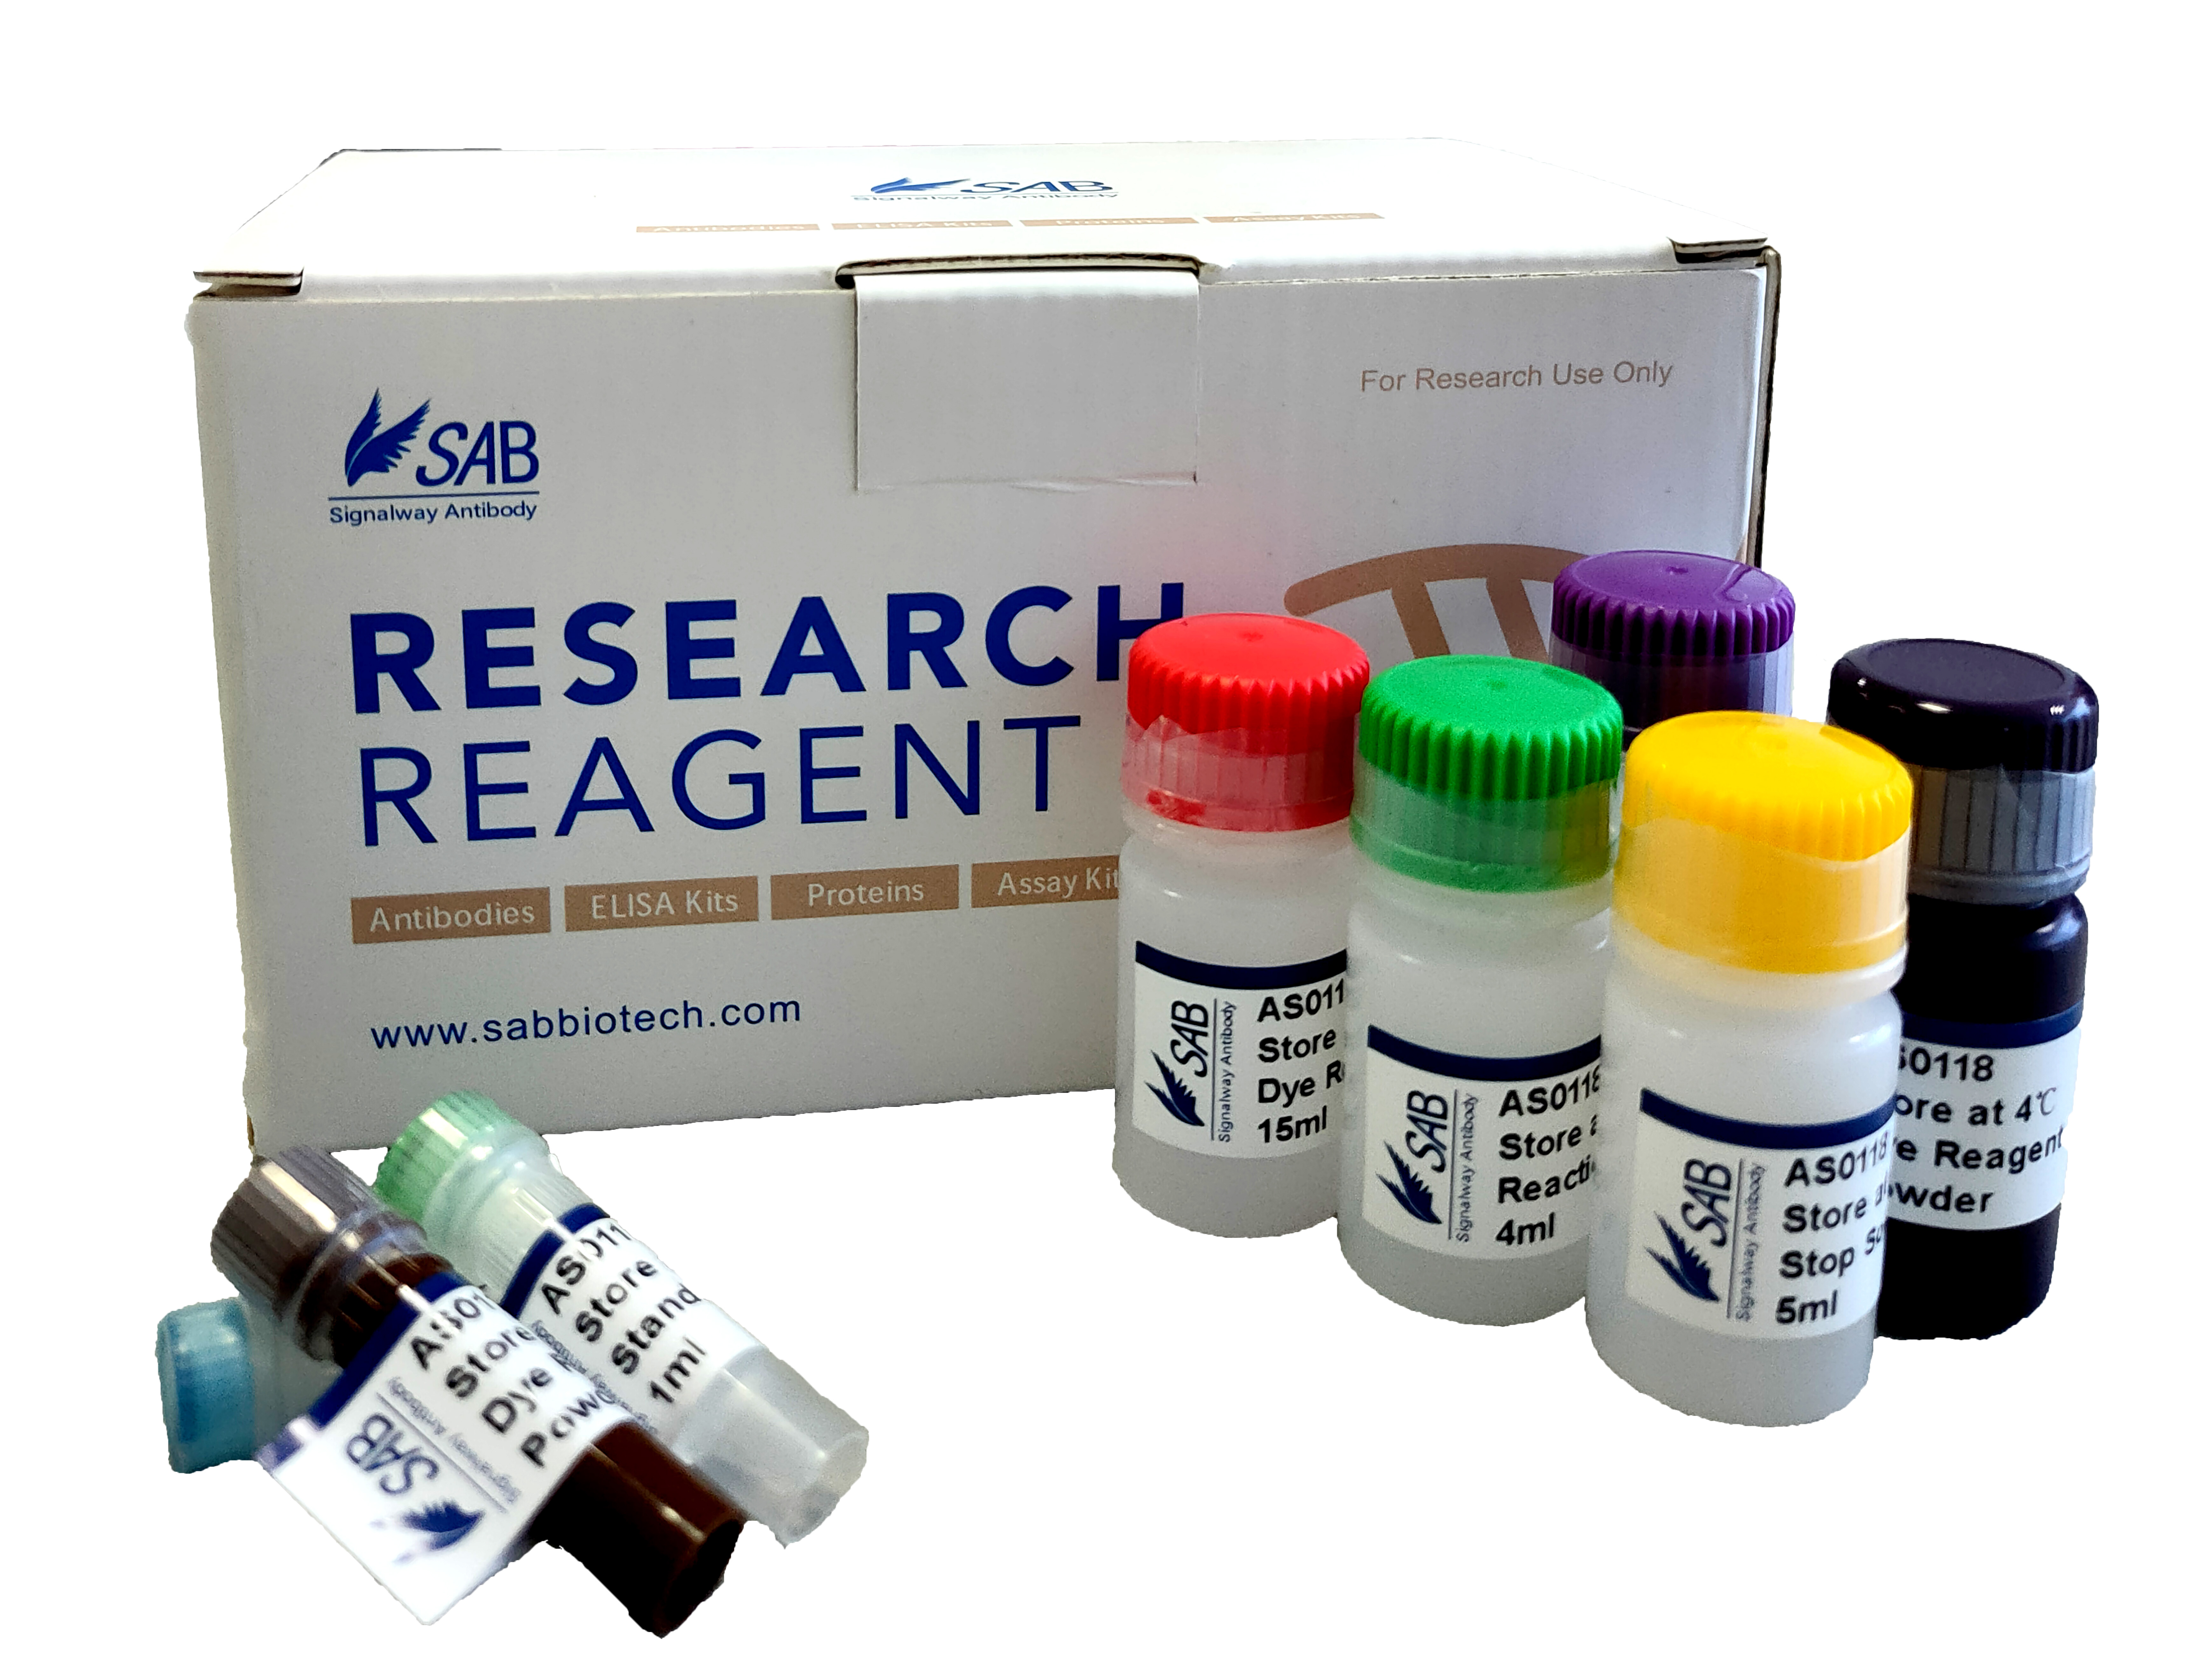 【Signalway Antibody】乙酰胆碱酯酶Acetylcholinesterase Microplate Assay Kit